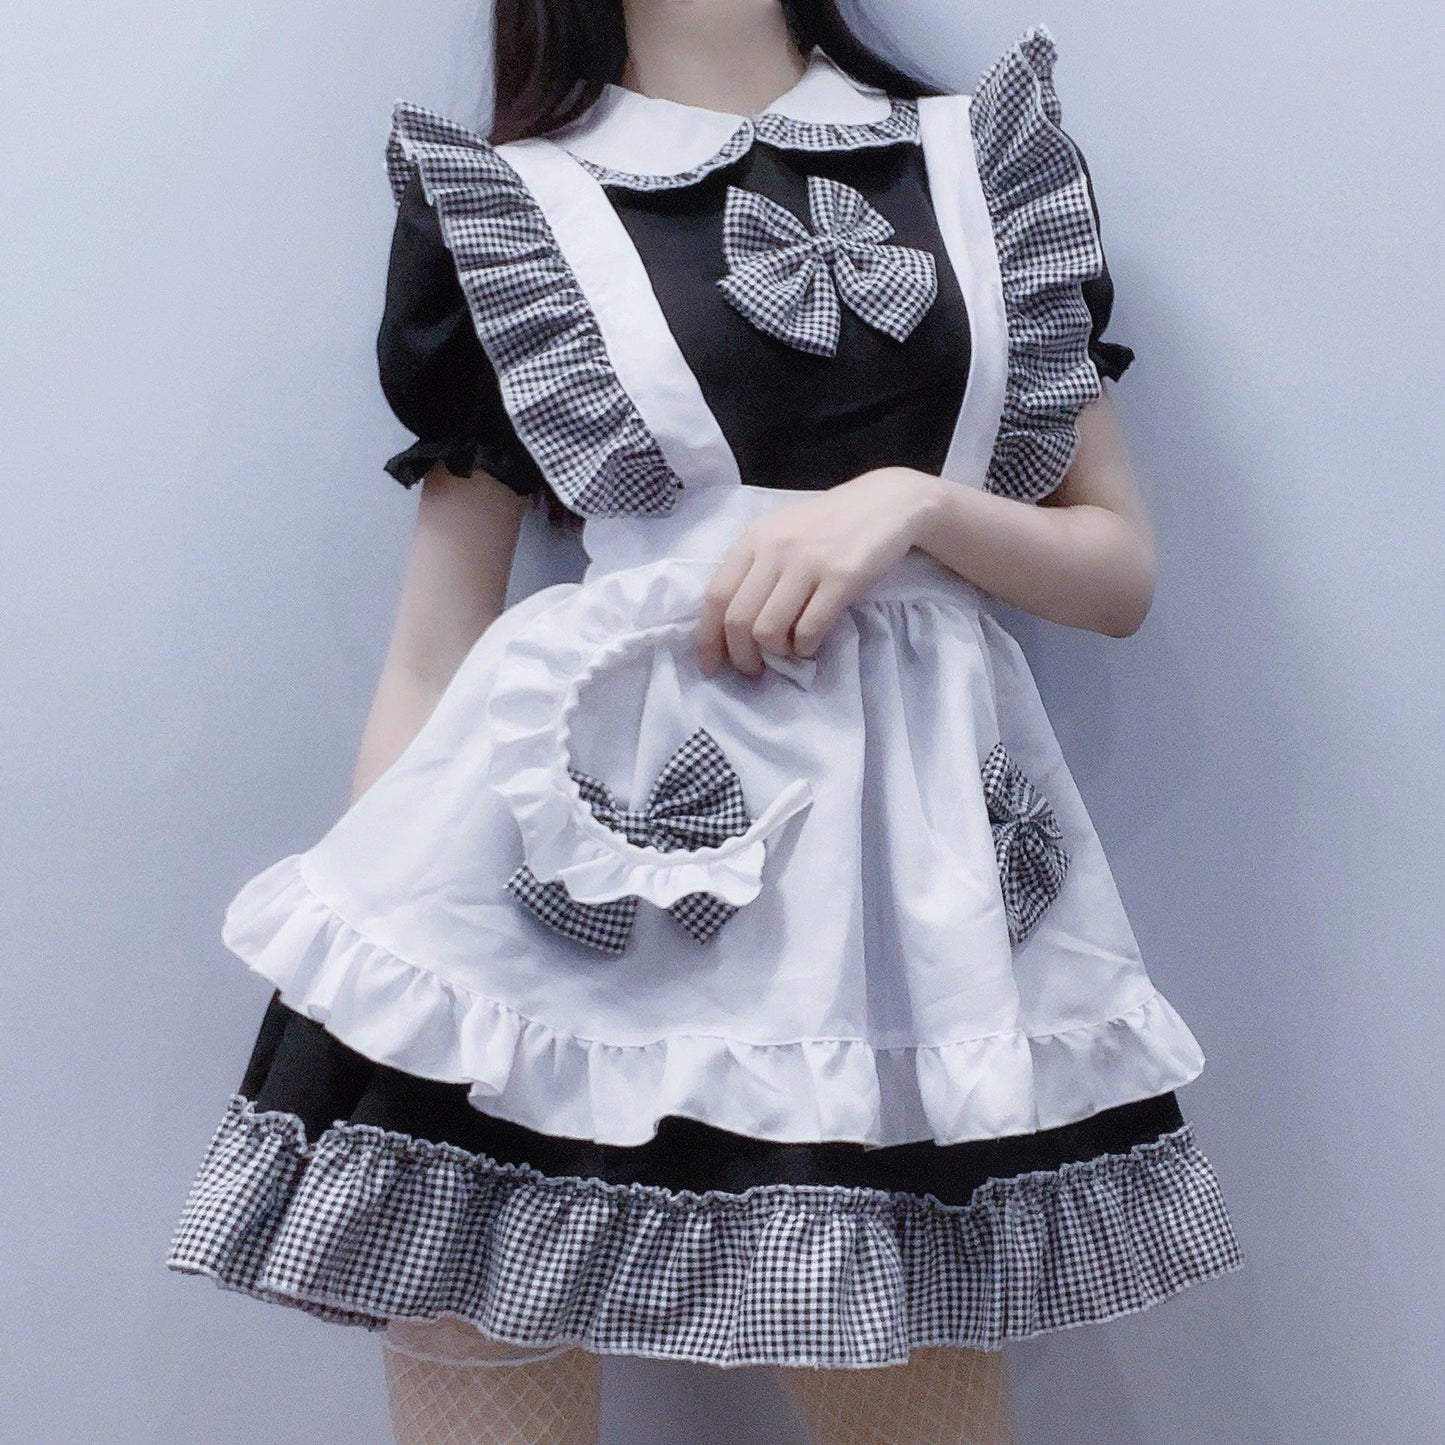 Celebrity Cat Girl Black White Plaid Maid Outfit Lolita Dress Fancy Cosplay Costume